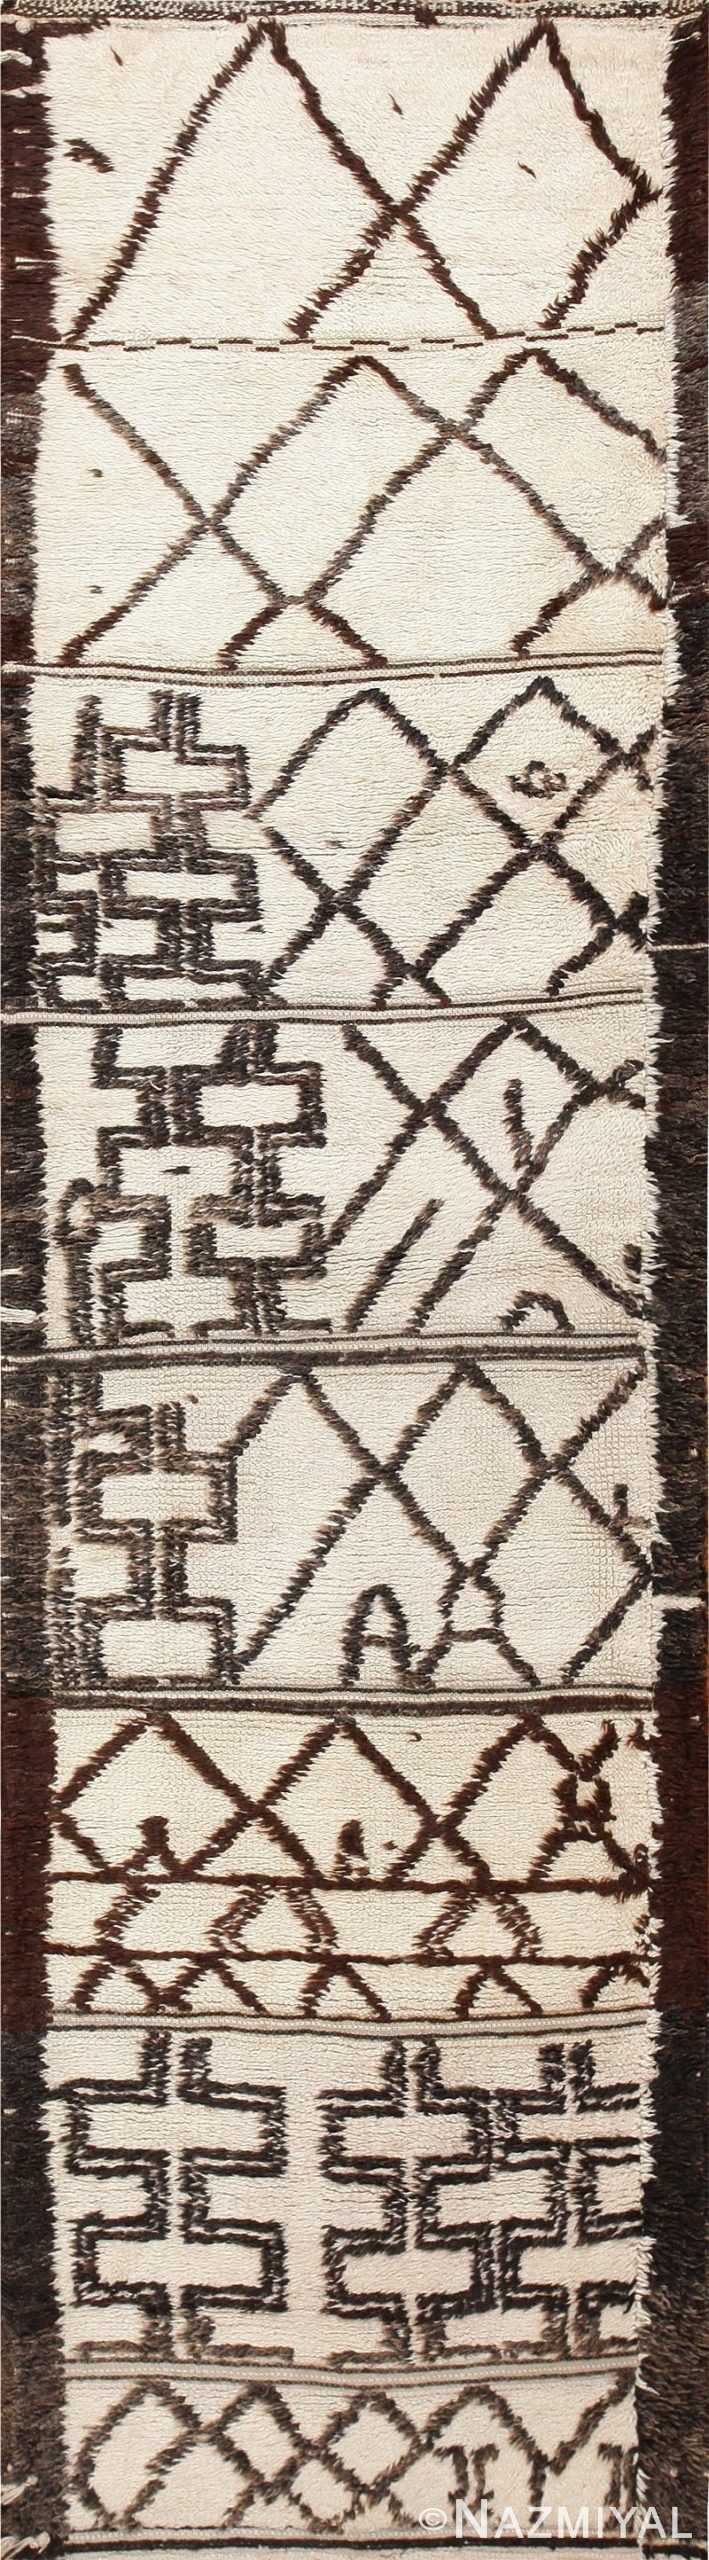 Moroccan Beni Ourain Runner Rug 47775 Detail/Large View